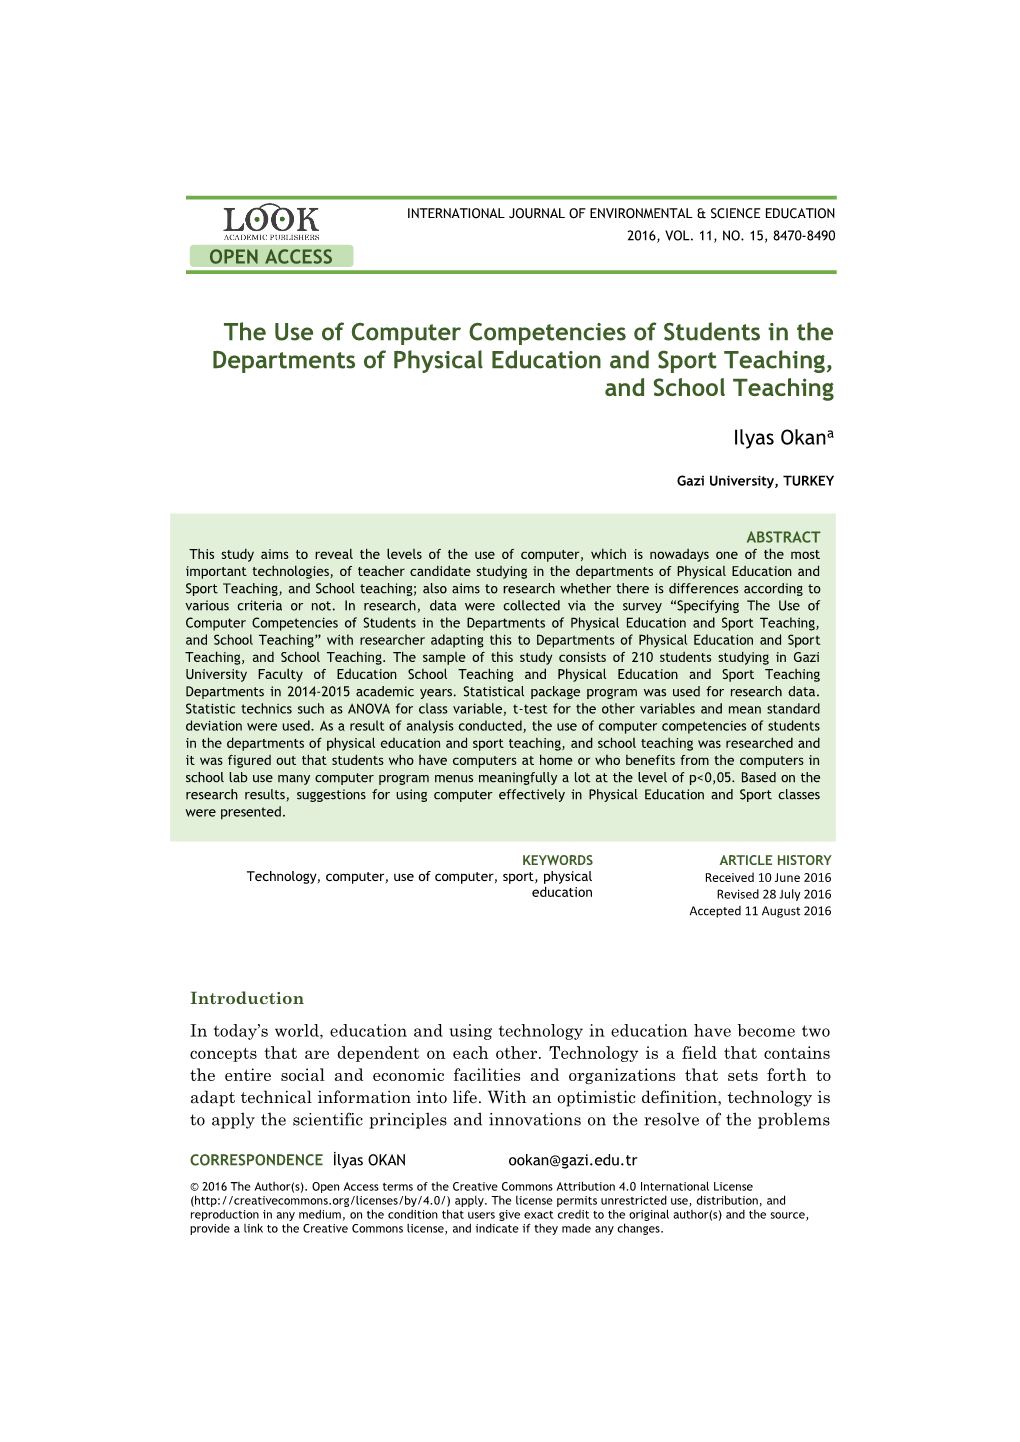 The Use of Computer Competencies of Students in the Departments of Physical Education and Sport Teaching, and School Teaching